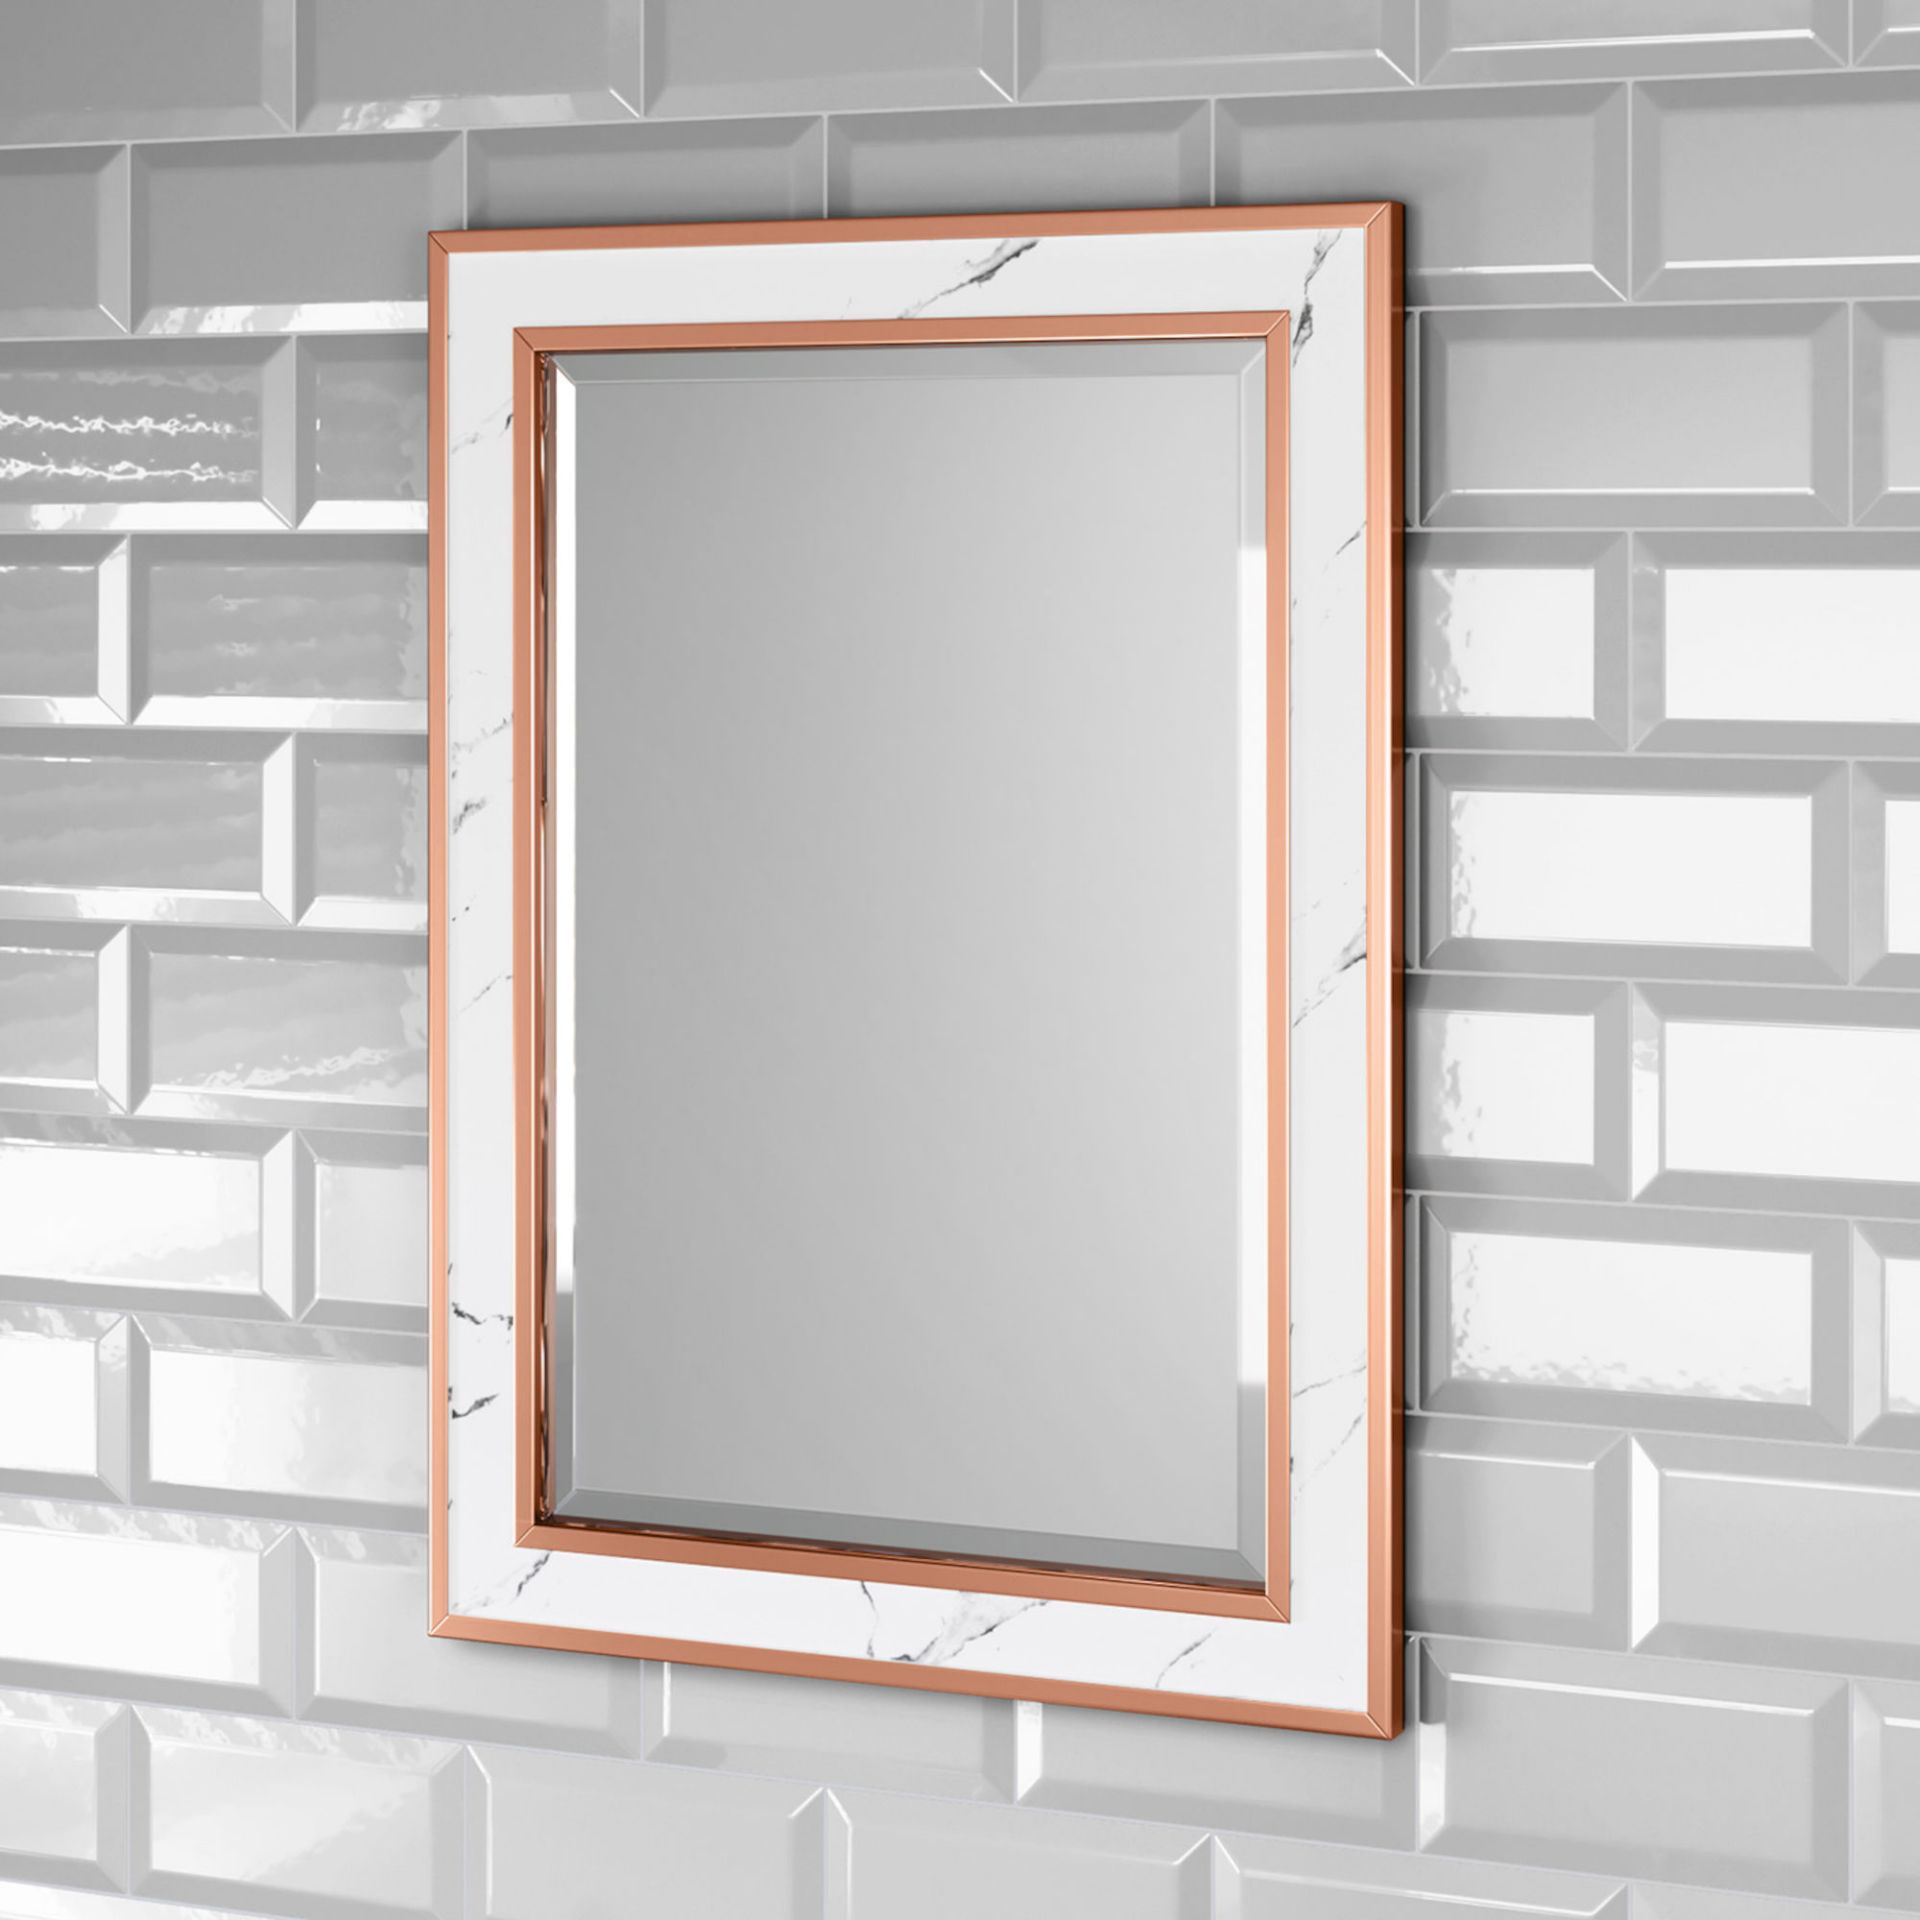 (Z34) 500x700mm Marble Copper Framed Mirror Manufactured from eco friendly recycled plastic W...